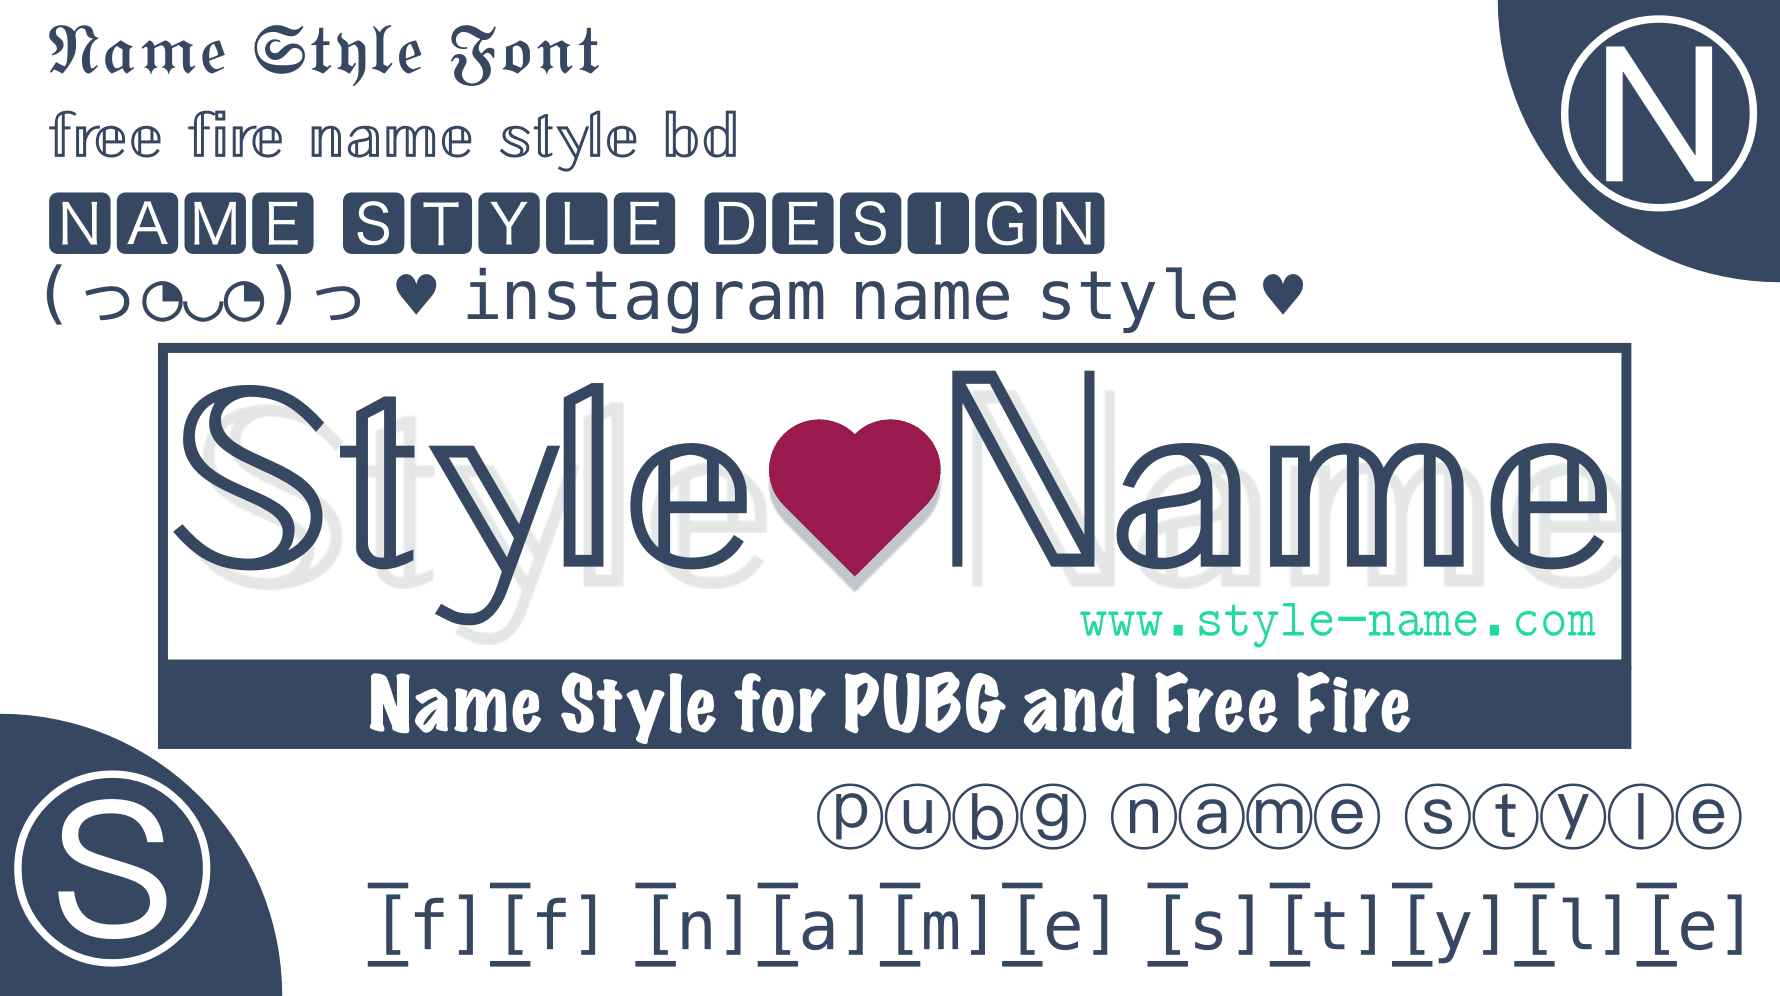 Name Style ➜ #𝟙😍꧁༒☬𝓨𝓸𝓾𝓻 𝓝𝓪𝓶𝓮☬༒꧂ Font Design